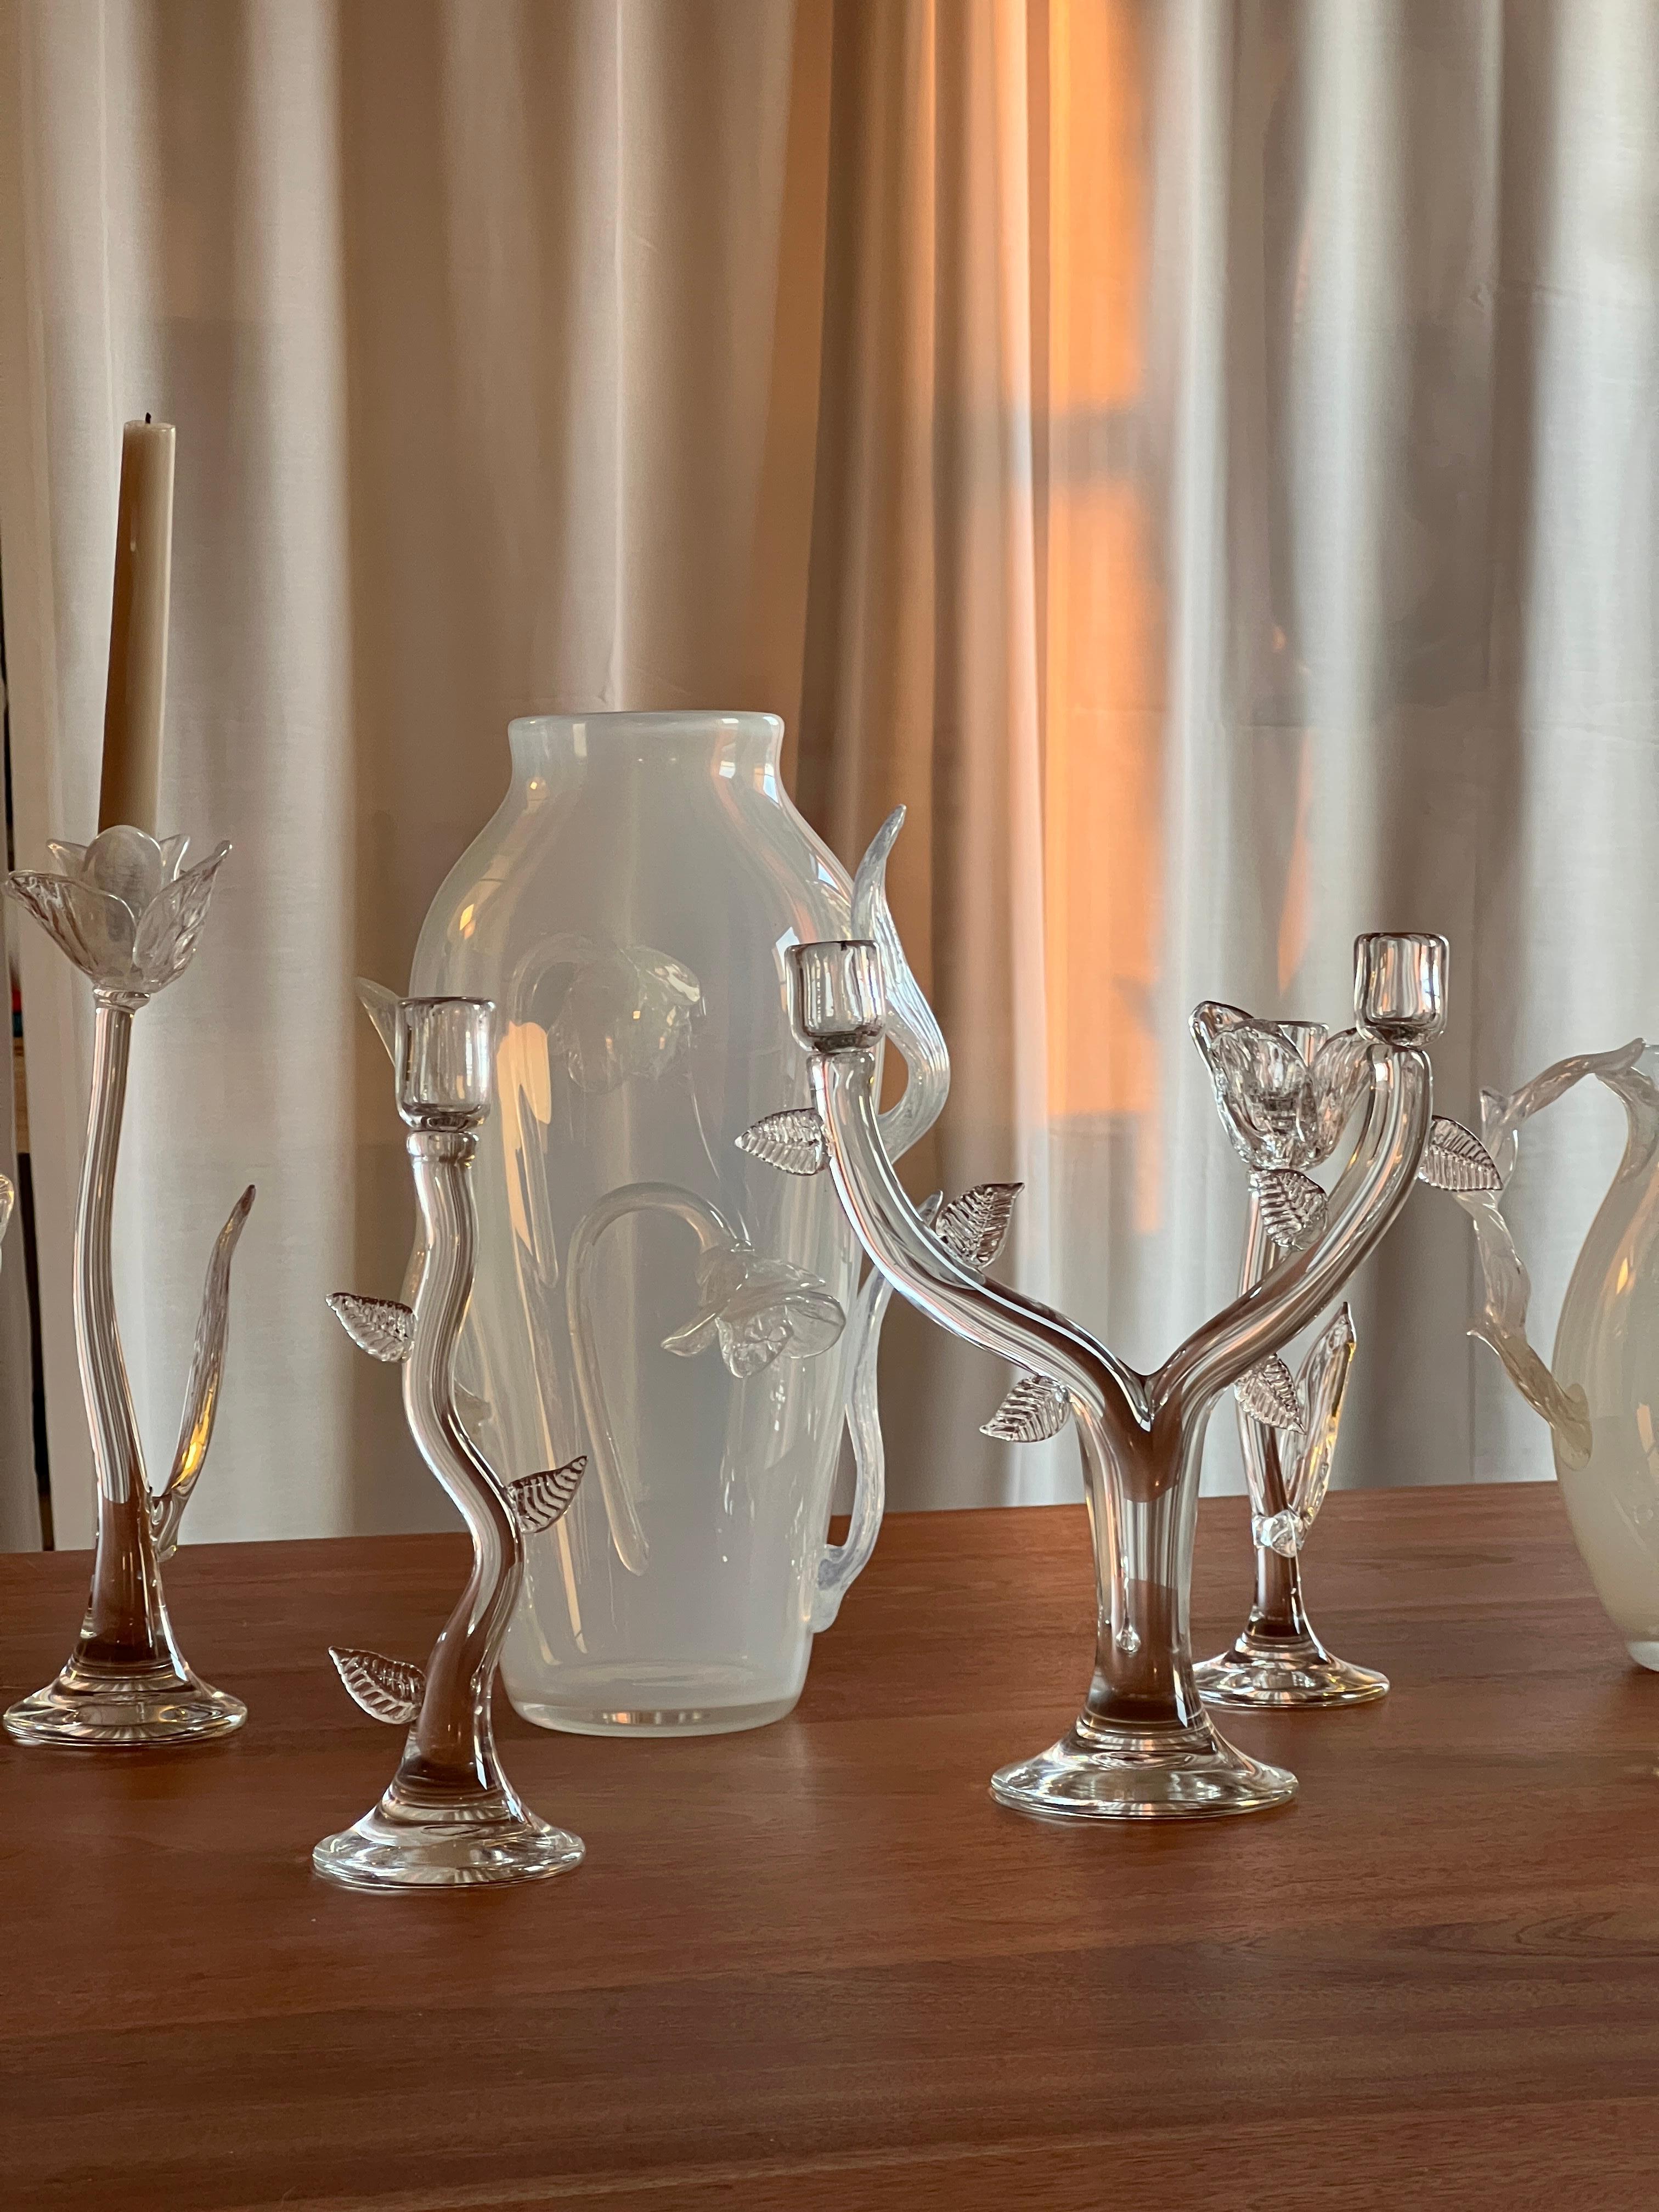 Hand blown soda lime glass with sculpted floral embellishments in alabaster white.  Part of our Giardino series, made in New York City.

Giardino Segreto’ or the ‘Secret Garden’ is a series of limited edition objects  that explore the poetic tension